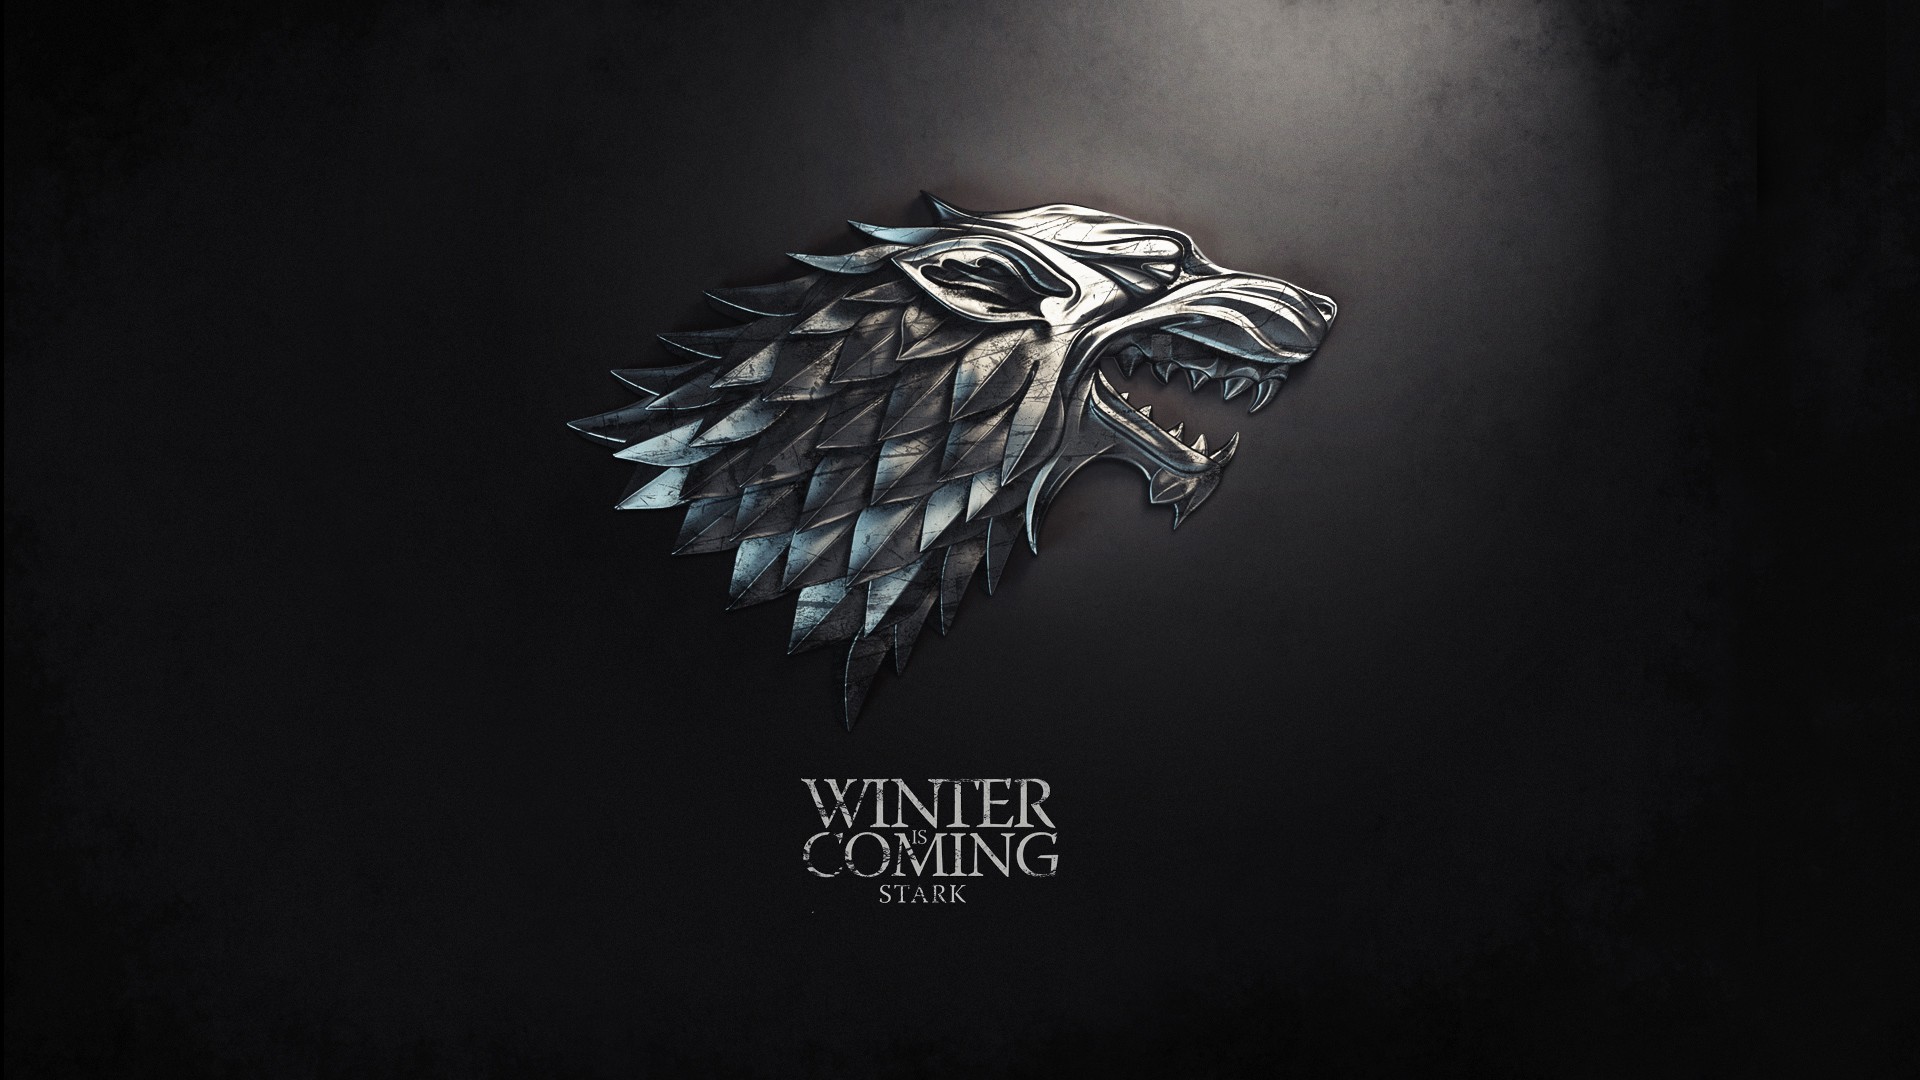 Game Of Thrones A Song Of Ice And Fire Digital Art House Stark Direwolf Winter Is Coming Sigils Simp 1920x1080